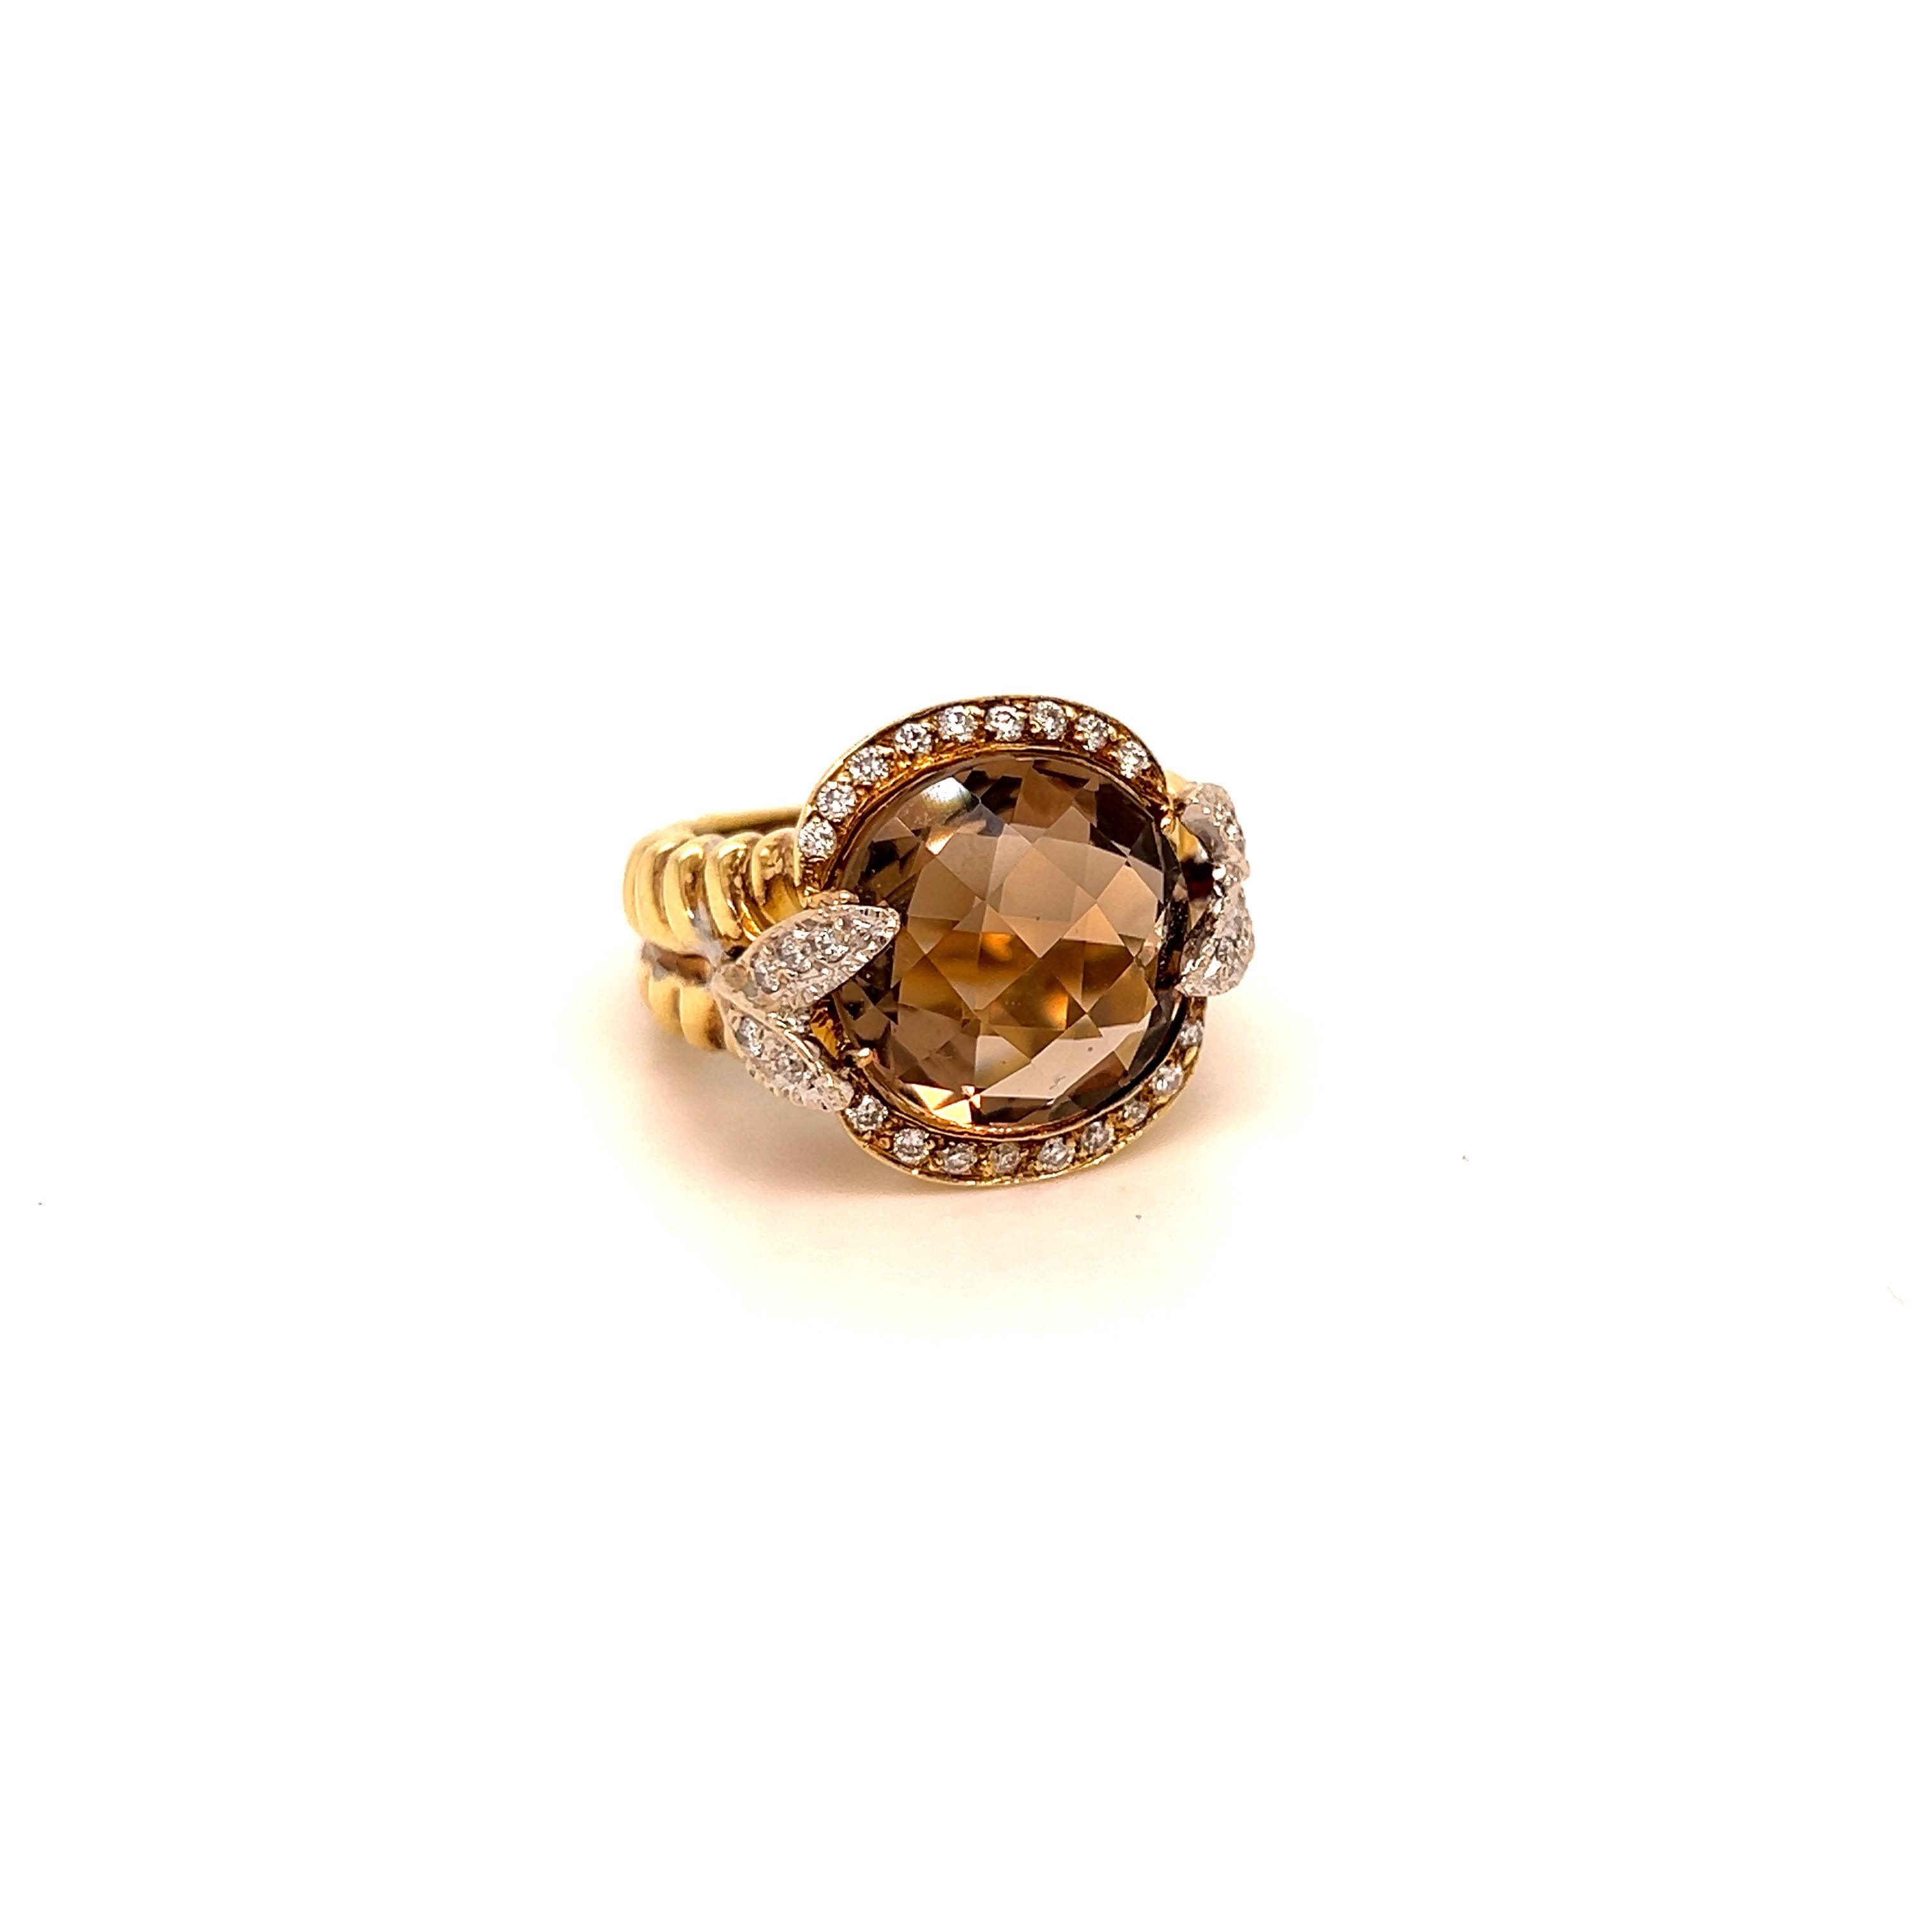 Modern 14K Gold and Diamond Ring with Checkerboard Cut Smoky Topaz Center